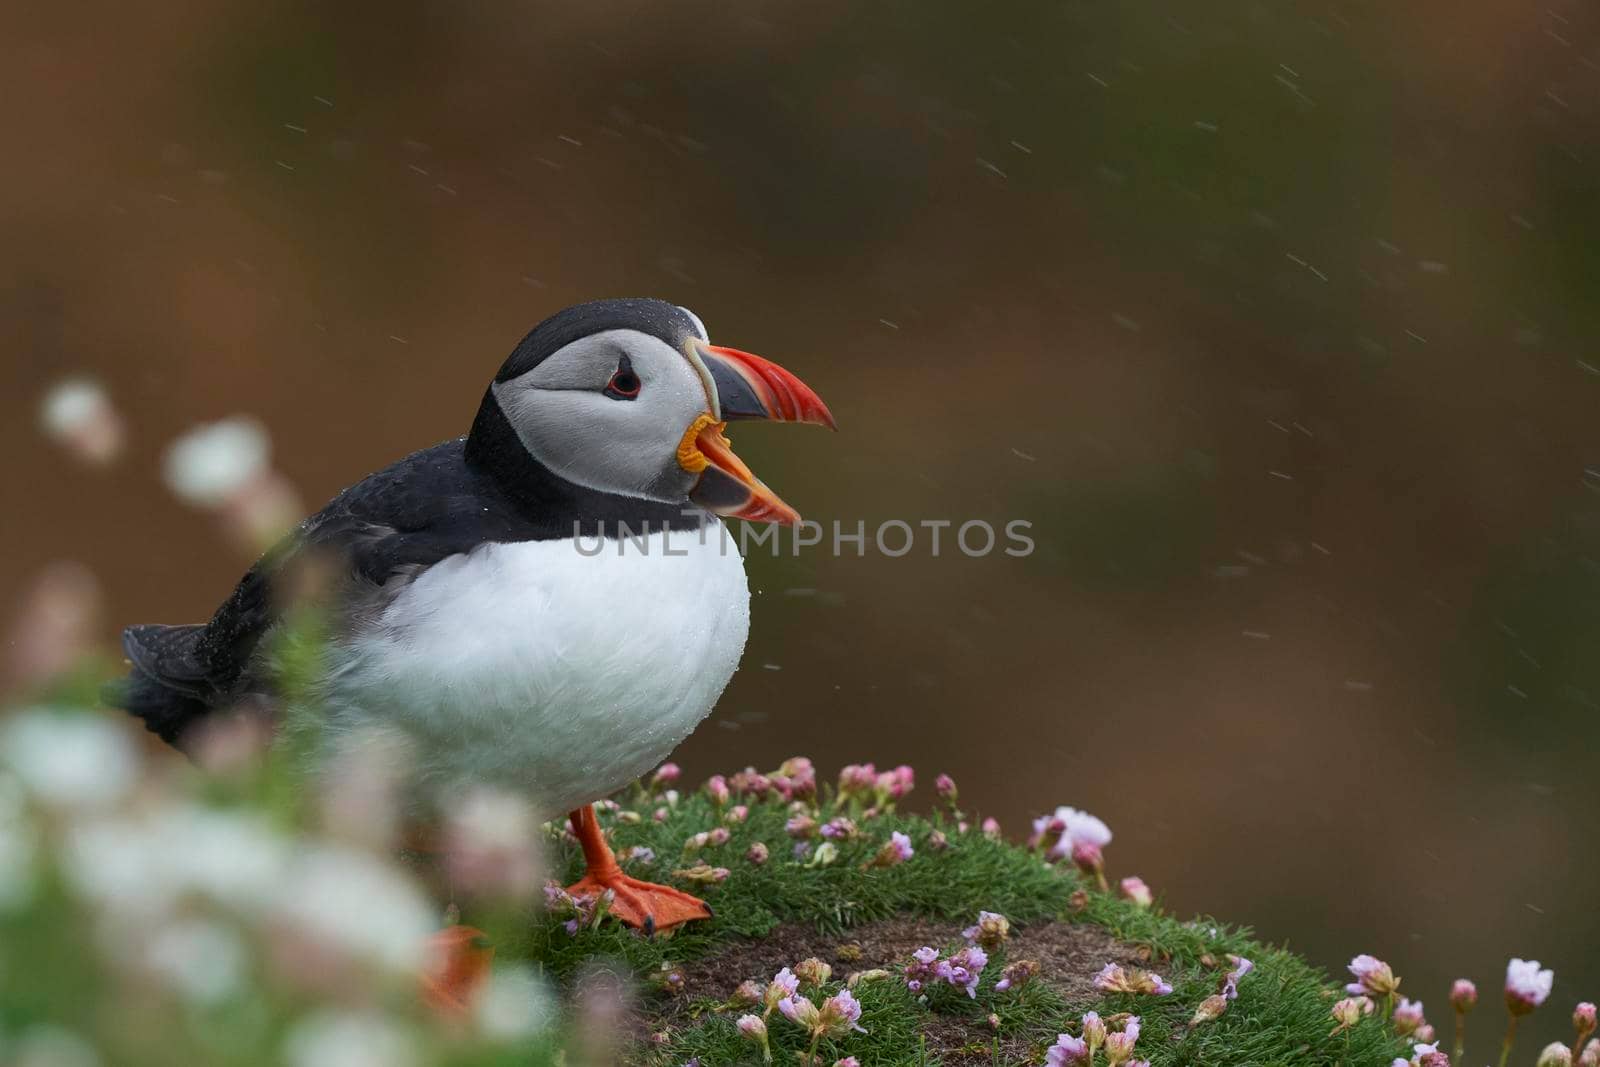 Atlantic puffin (Fratercula arctica) calling amongst spring flowers on a cliff on Great Saltee Island off the coast of Ireland.